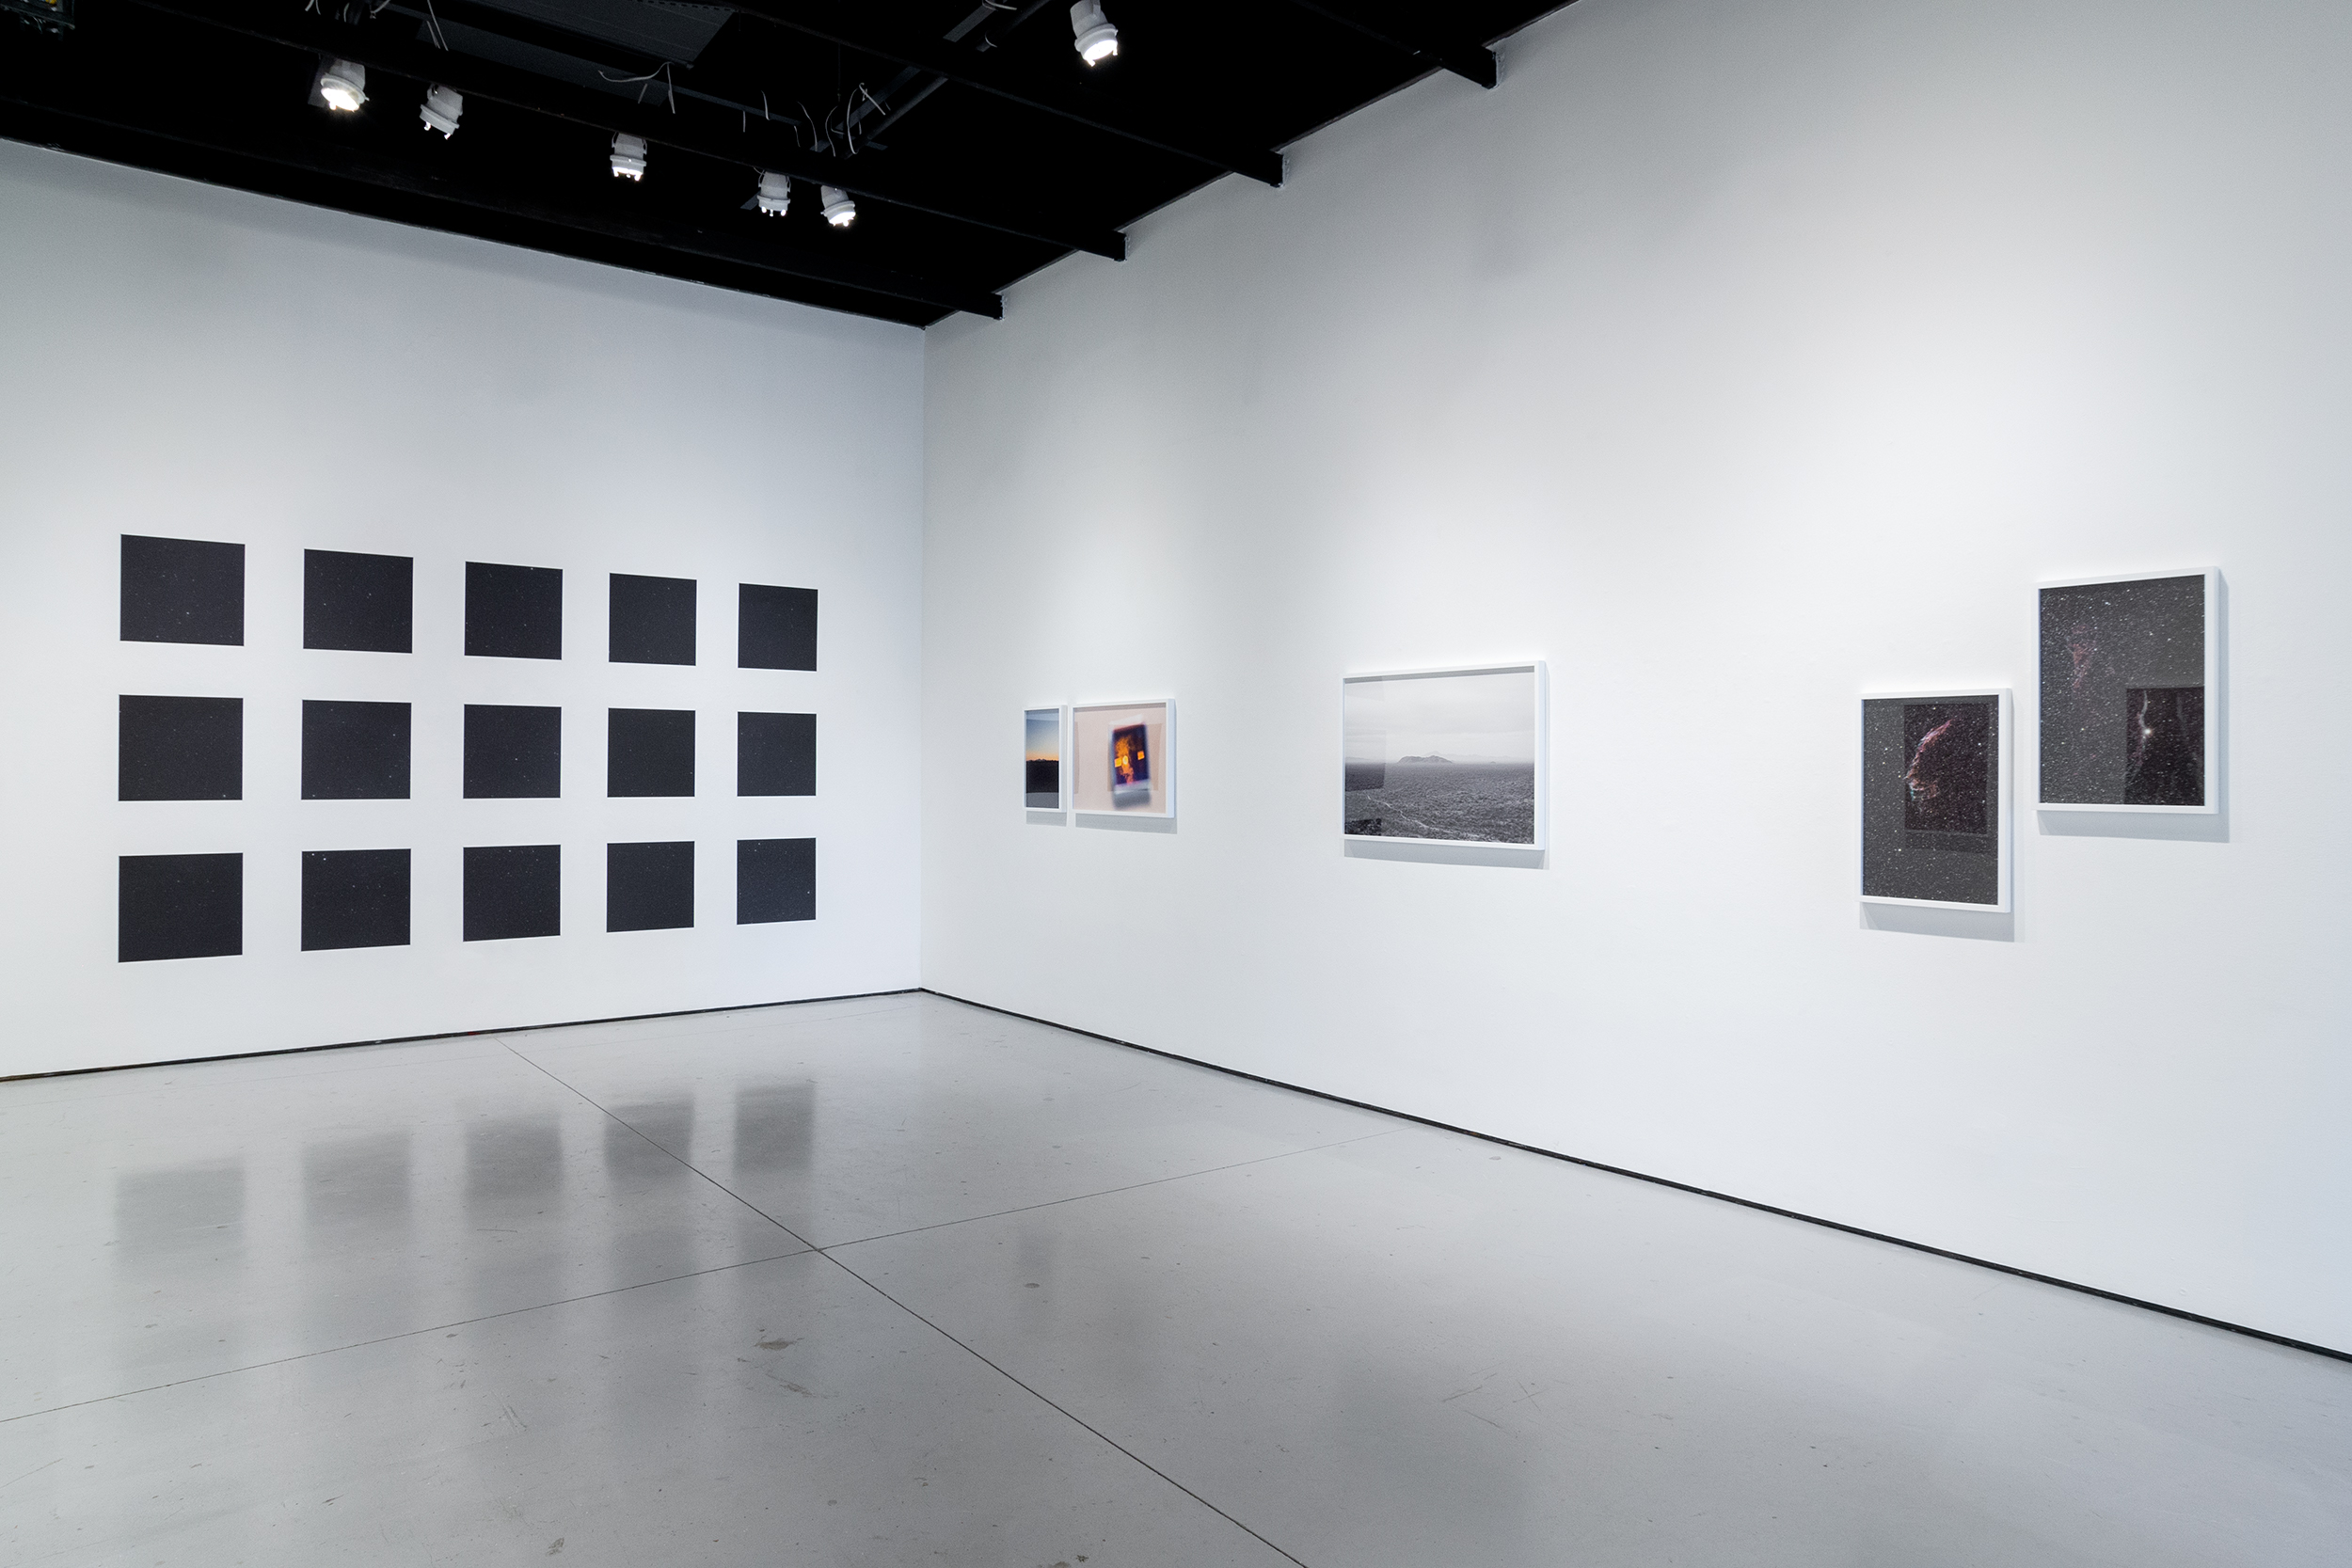  Installation view. Solo exhibition at the West Gallery, California State University Northridge, June 2019. 